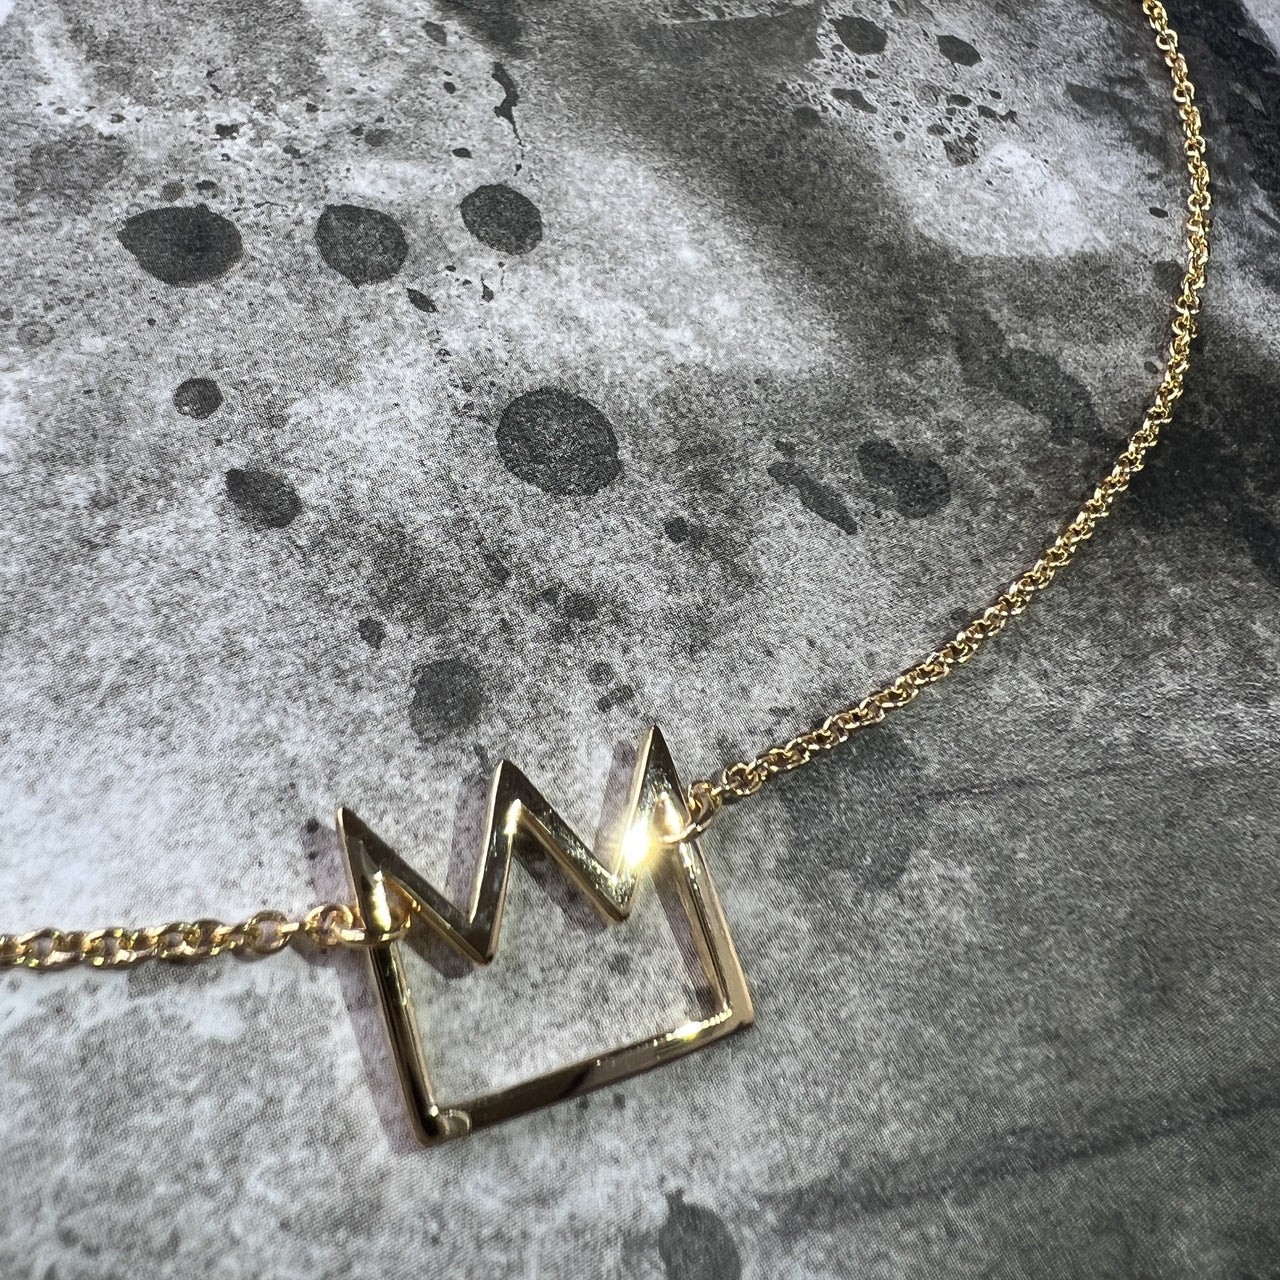 CHAIN WITH PENDANT "CROWN" / SOLID GOLD